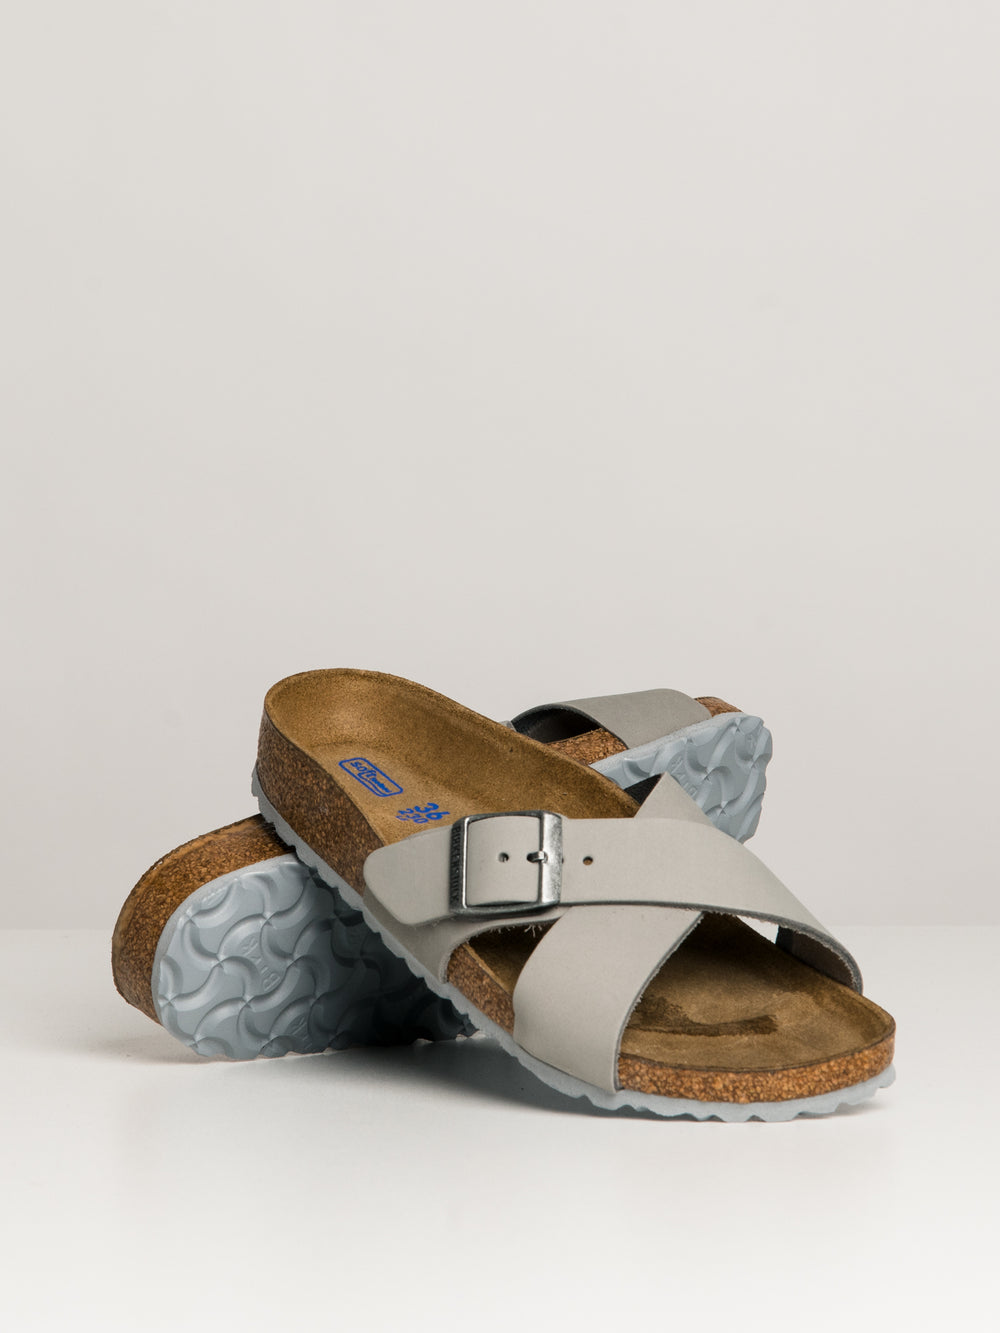 WOMENS BIRKENSTOCK SIENA SOFT FOOTBED NARROW SANDALS - CLEARANCE